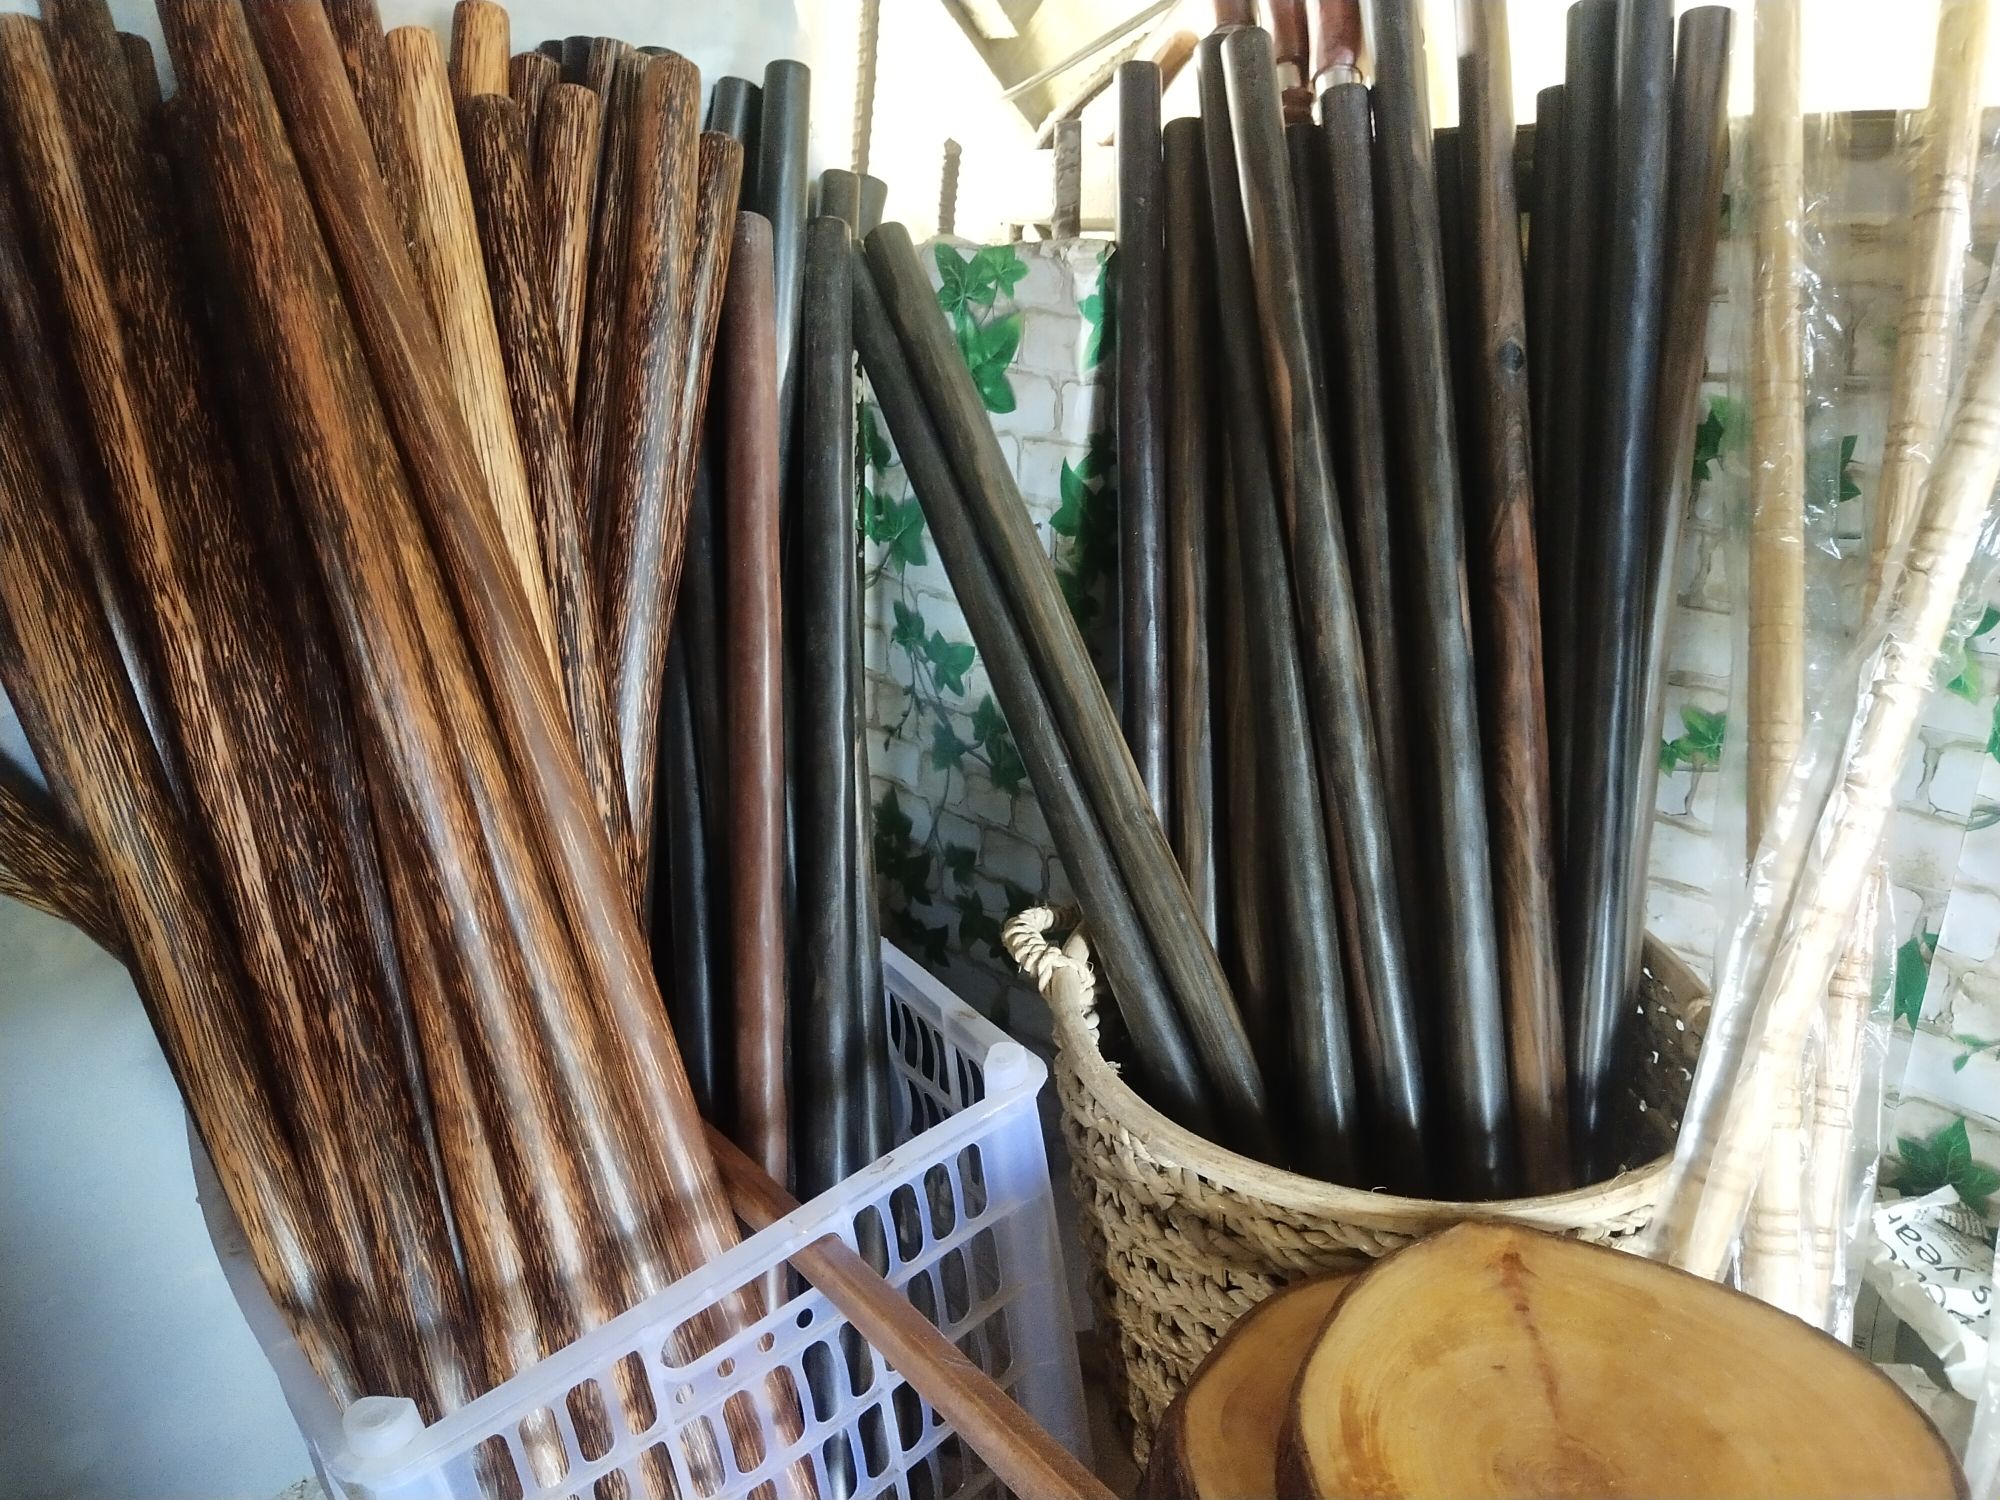 HIGH QUALITY AND HEAVY DUTY ARNIS STICKS WHOLESALER'S PRICE